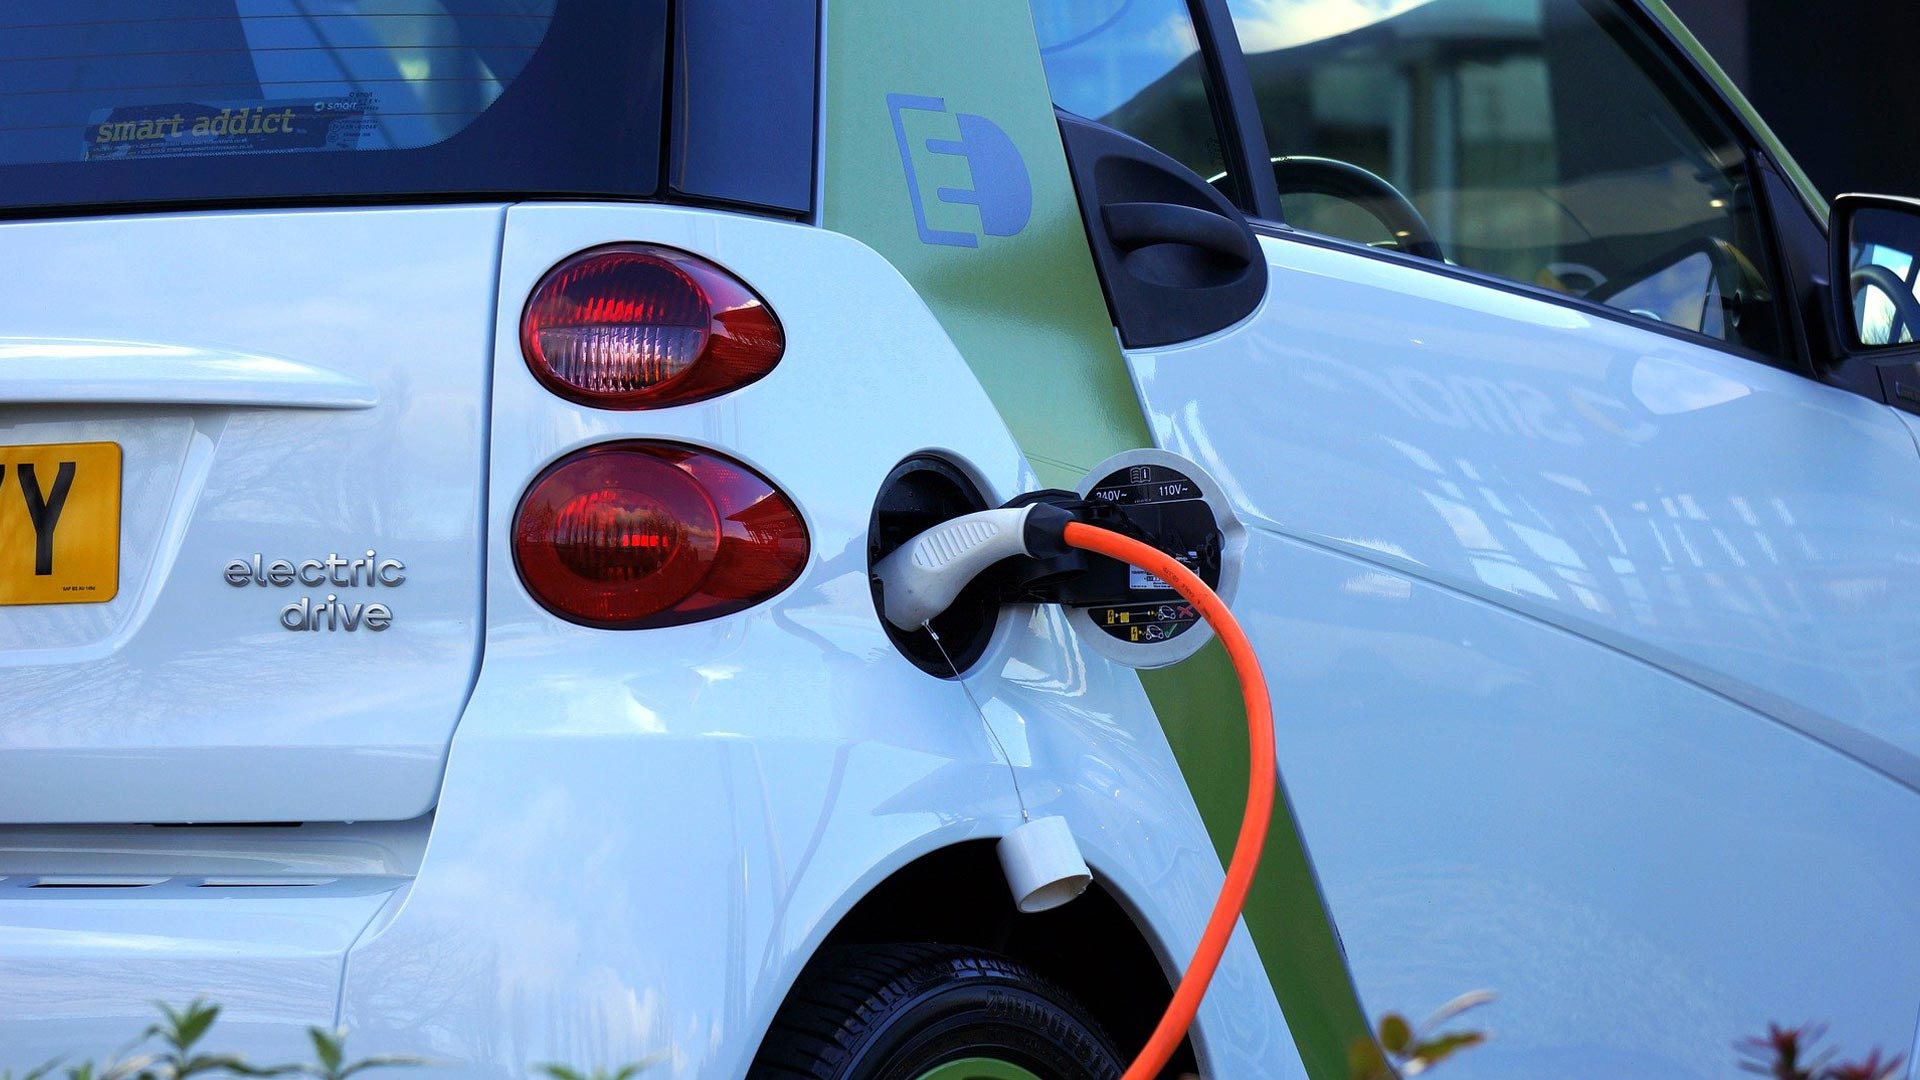 Economy-wide rebound makes UK’s electric car subsidy fall short of expectations